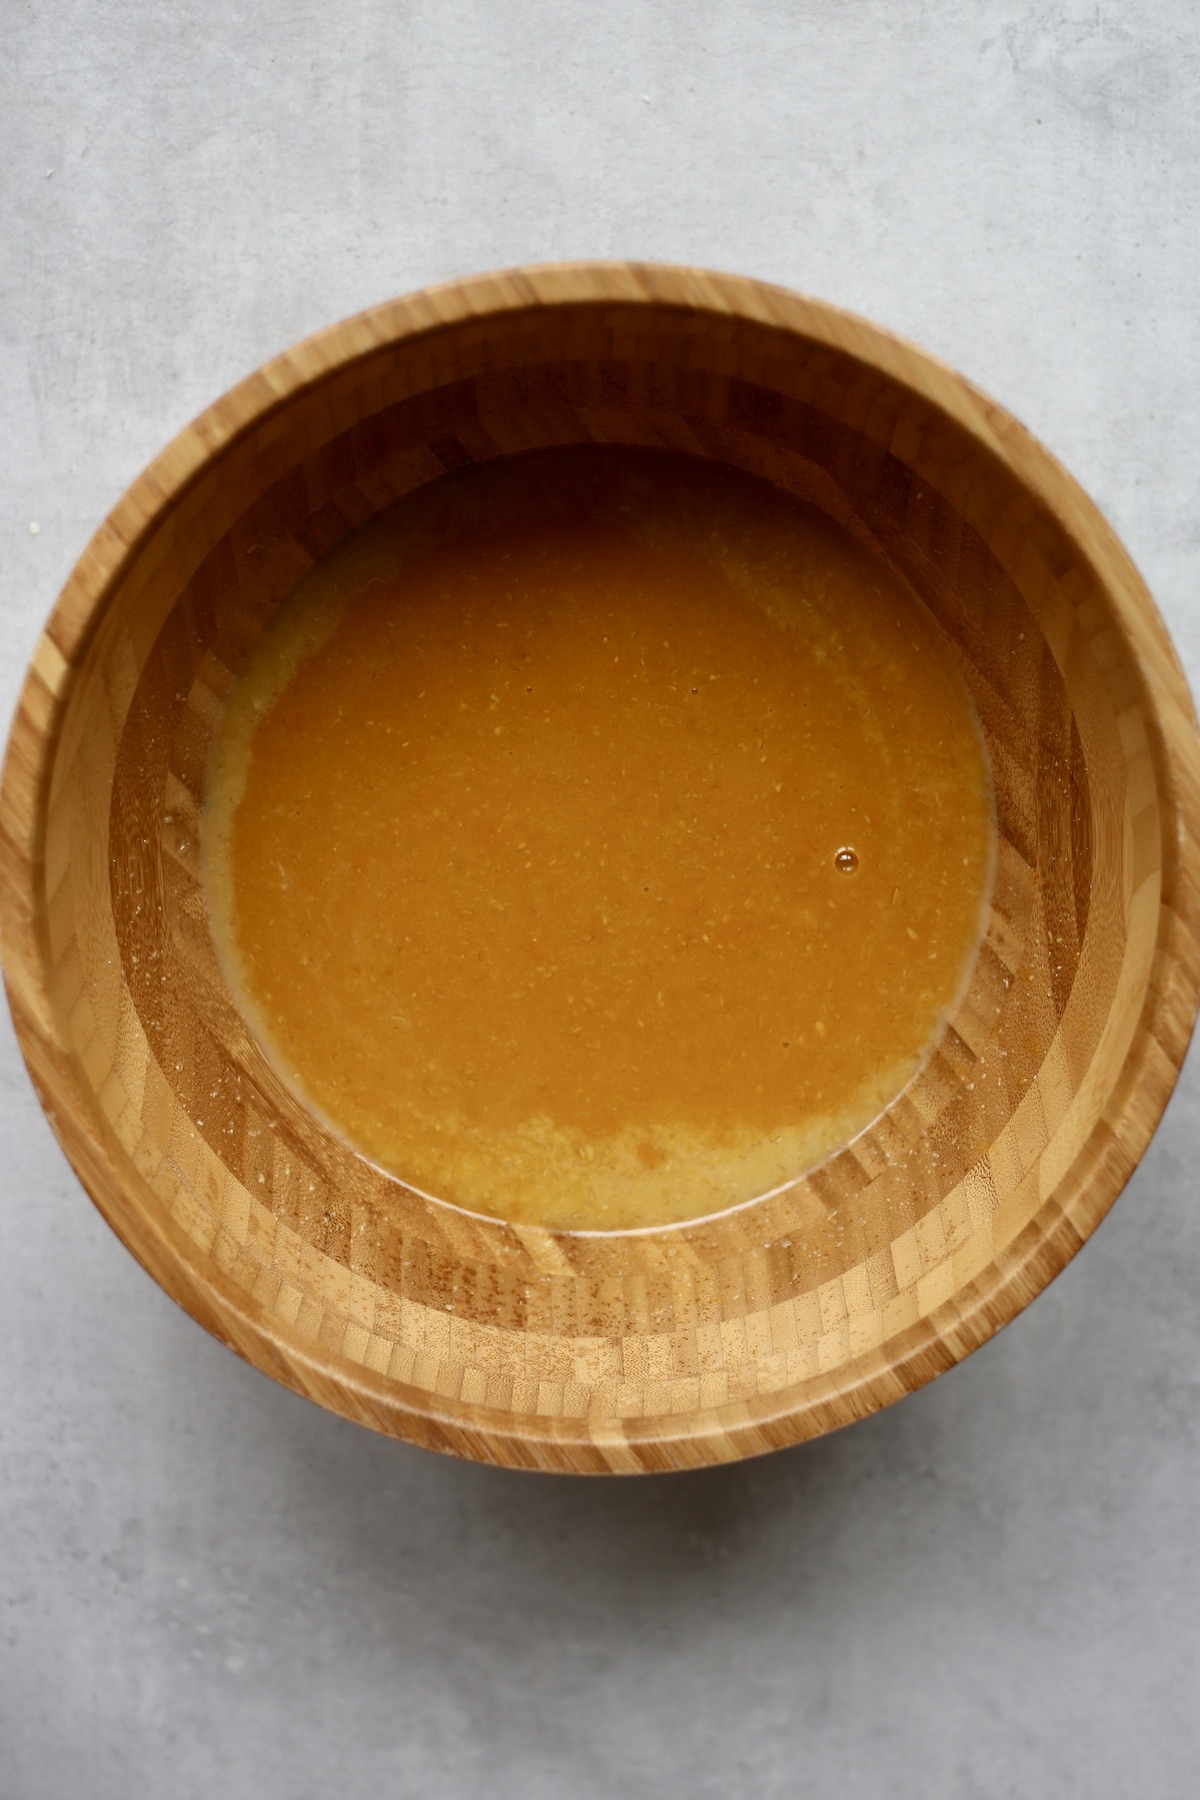 Pumpkin puree, oil and non-dairy milk mixed together in a large wooden mixing bowl.